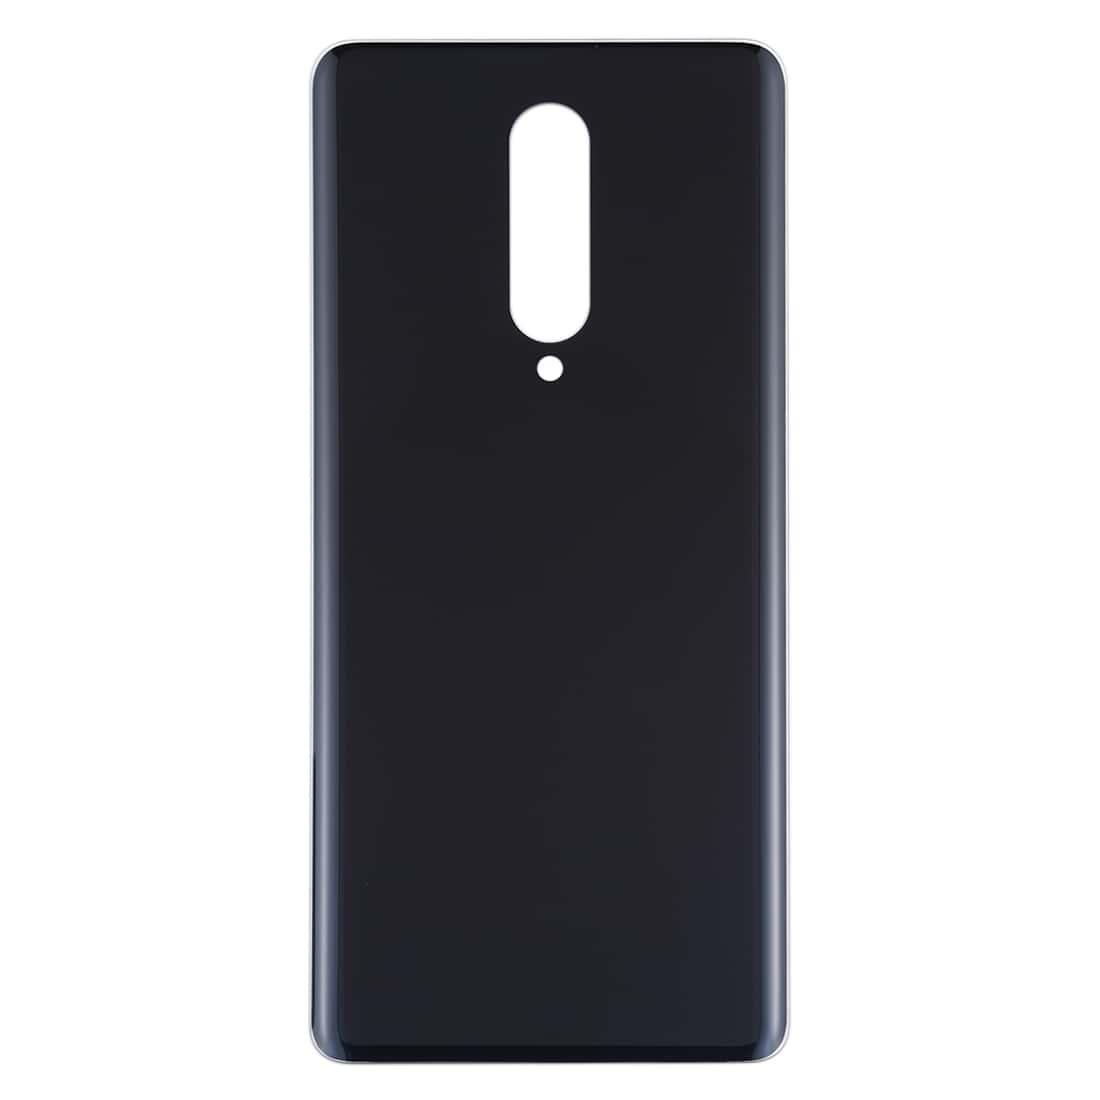 Back Glass Panel for  Oneplus 8 Black